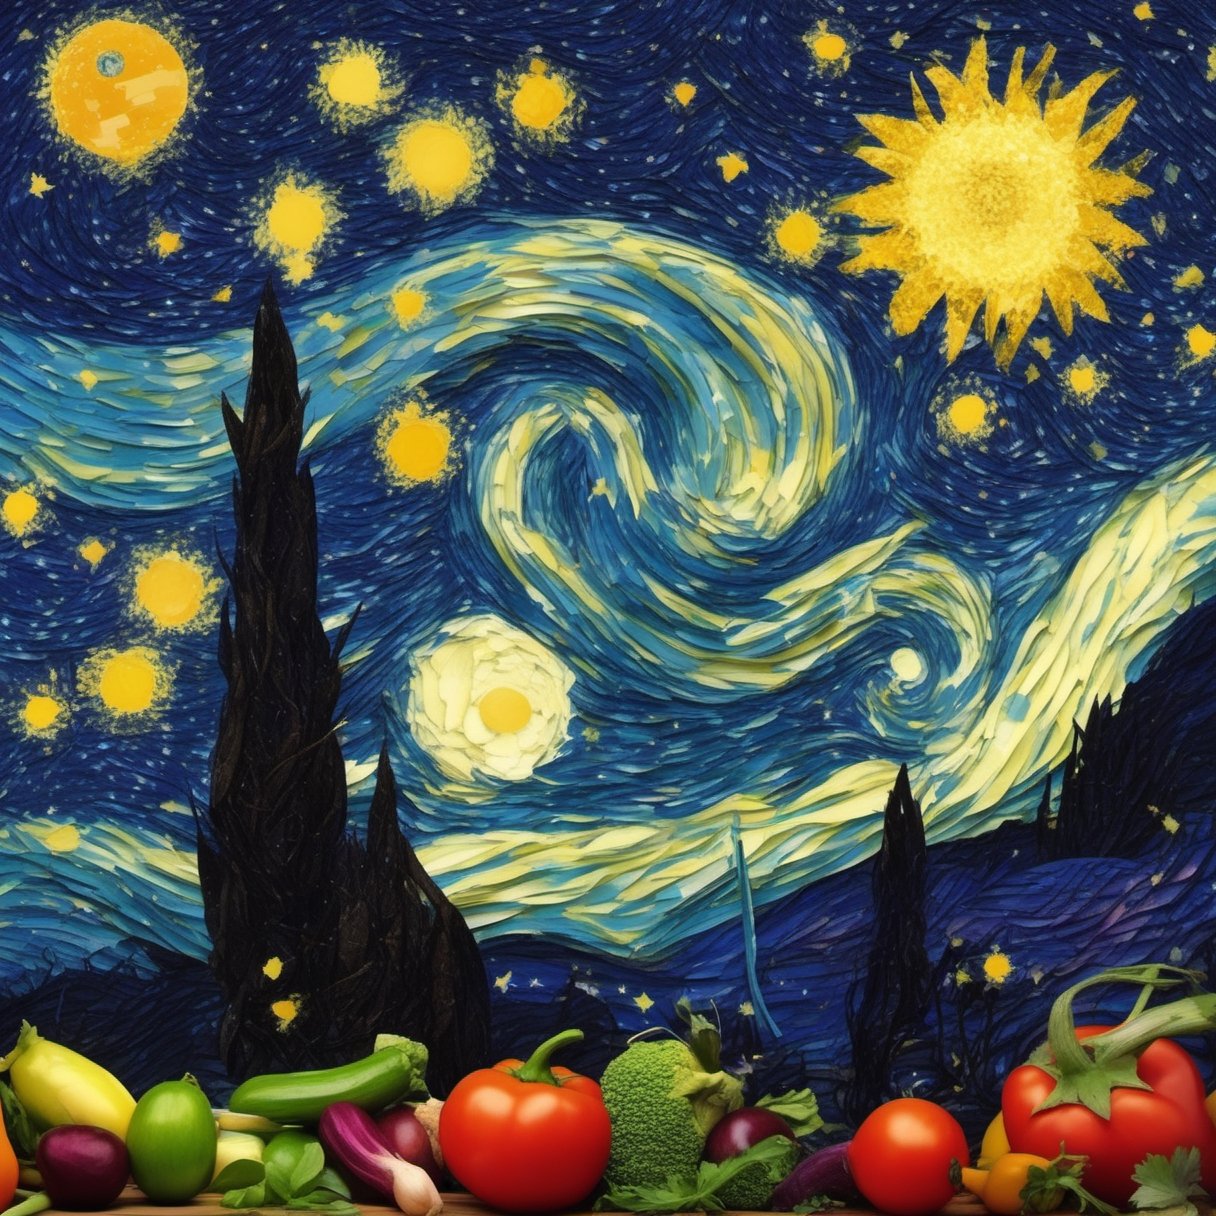 Vegatables arranged as Starry Night, v0ng44g,p0rtr14t